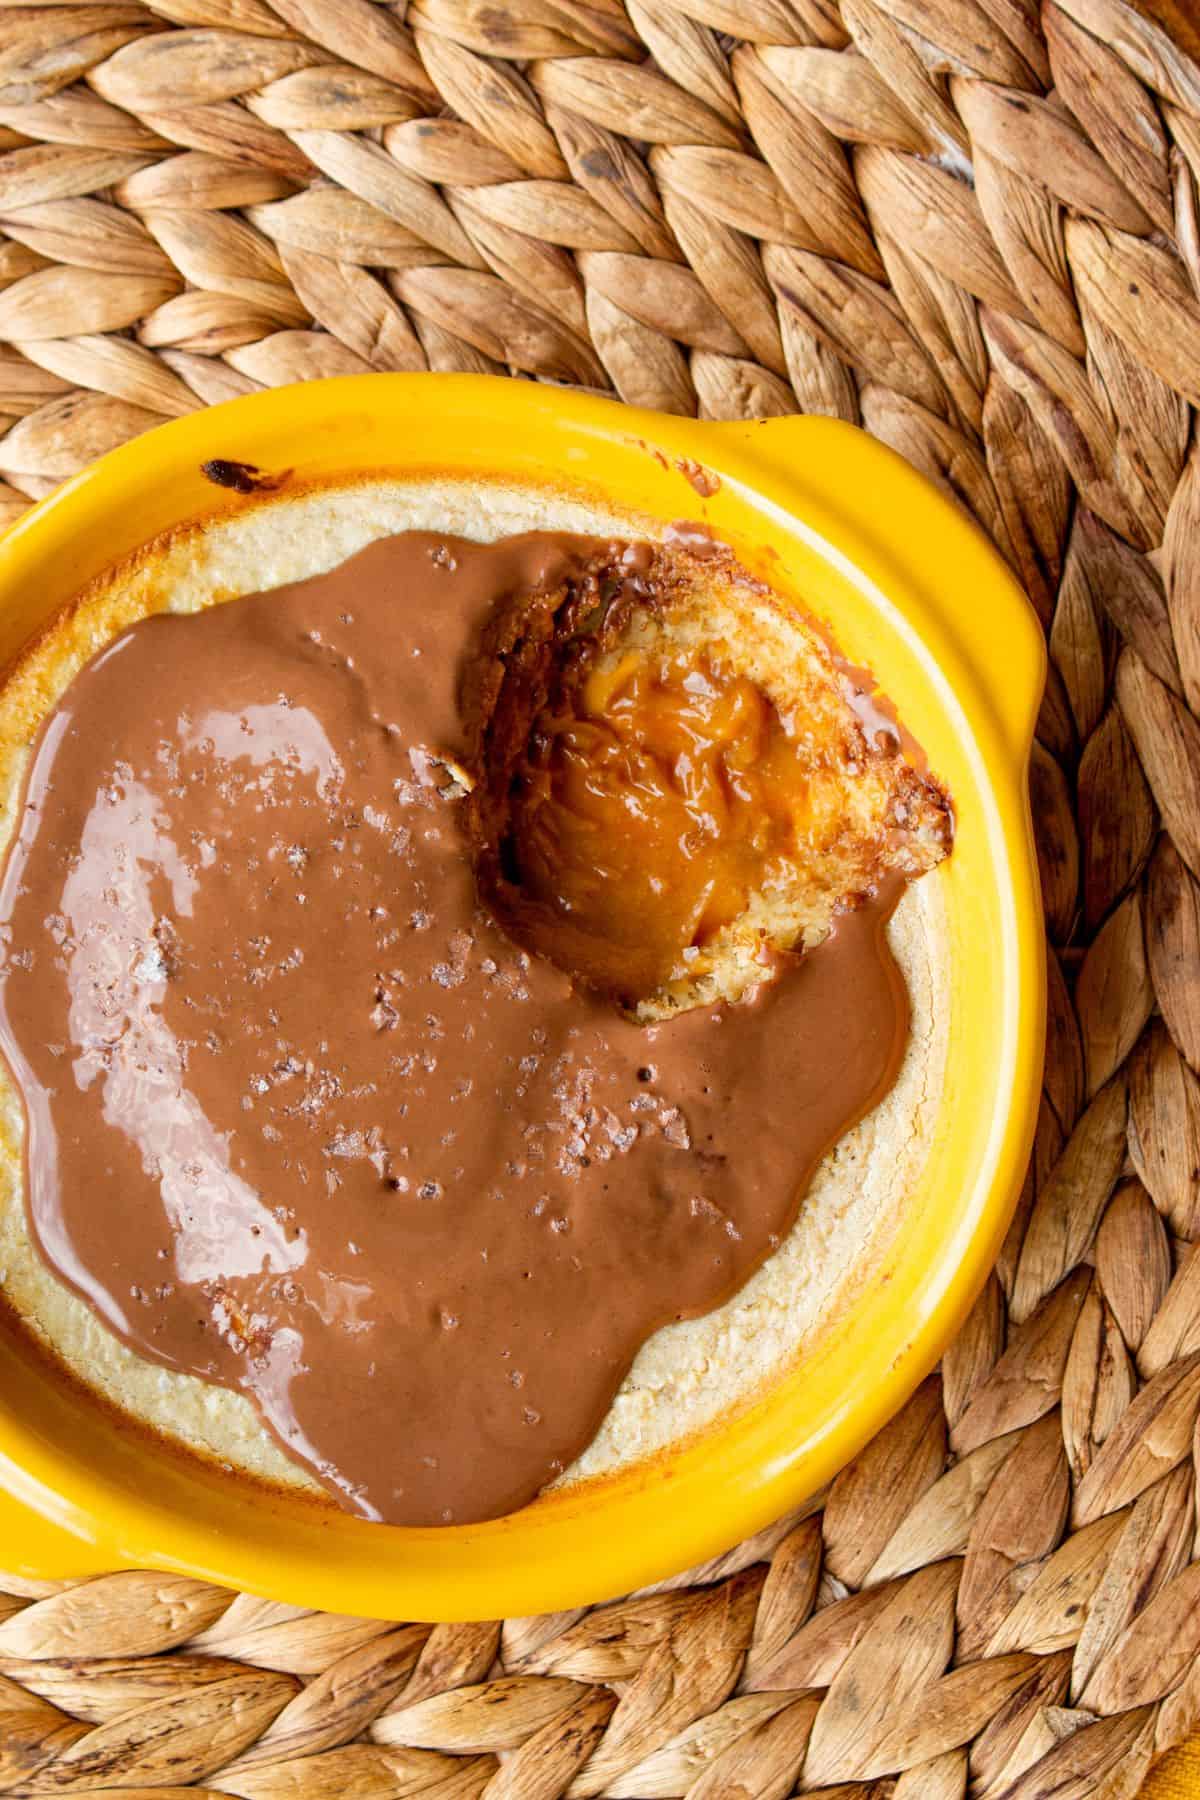 Overhead view of  Baked Oats with peanut butter with a chocolate topping in a yellow ramekin with a spoonful taken out of it on a straw heat mat.